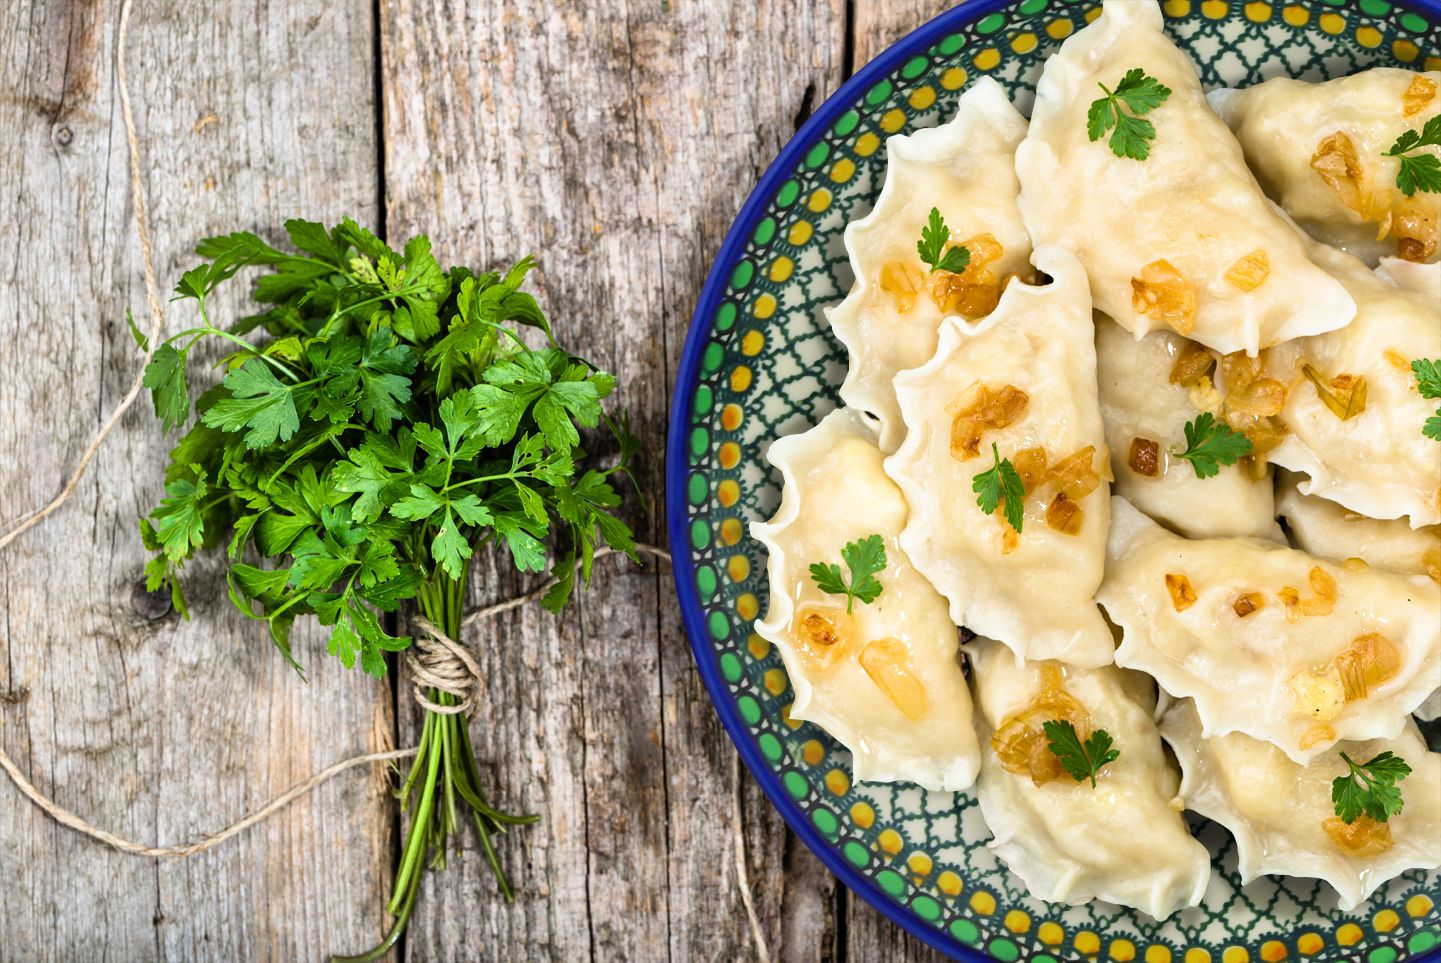 Dumplings with cheese and potato